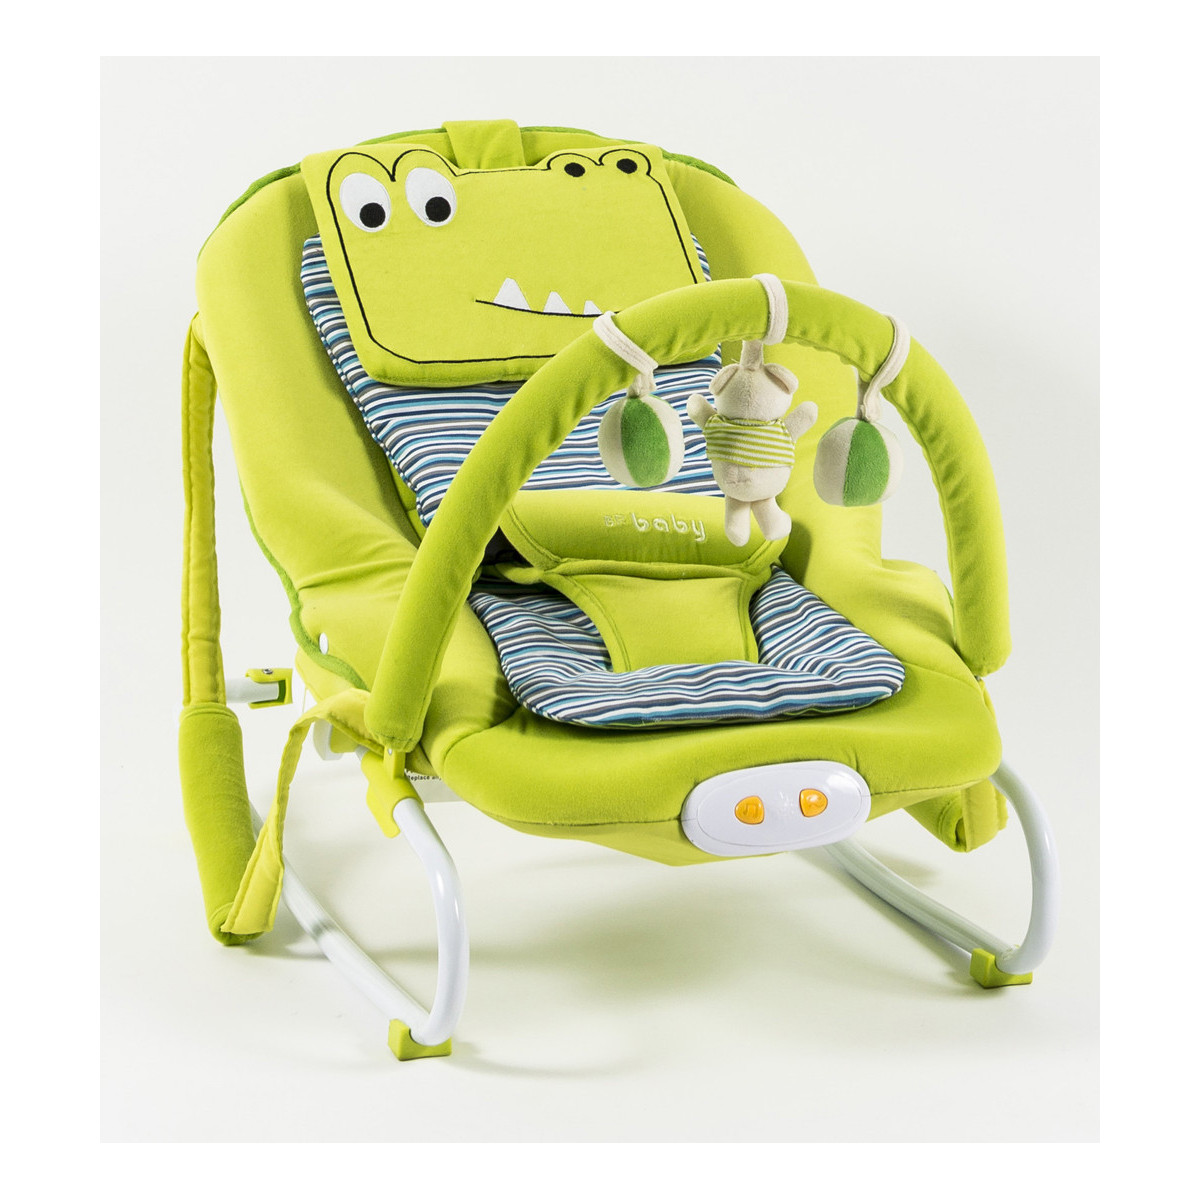 BRbaby - Musical Vibrations Rocker - Lime Croc